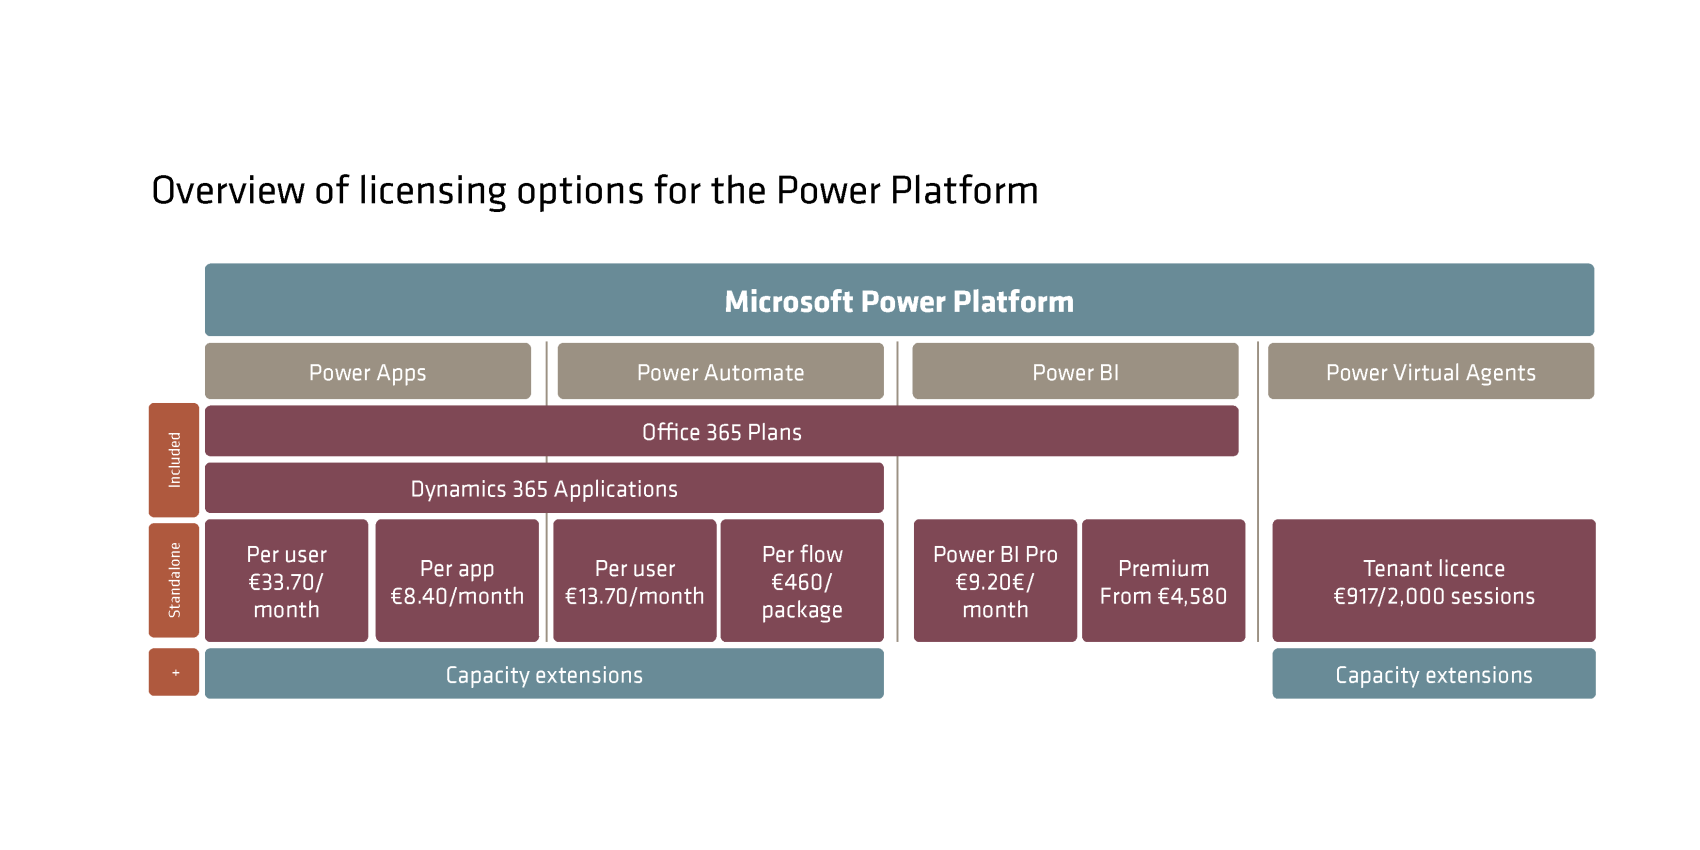 Overview of licensing options for the Power Platform